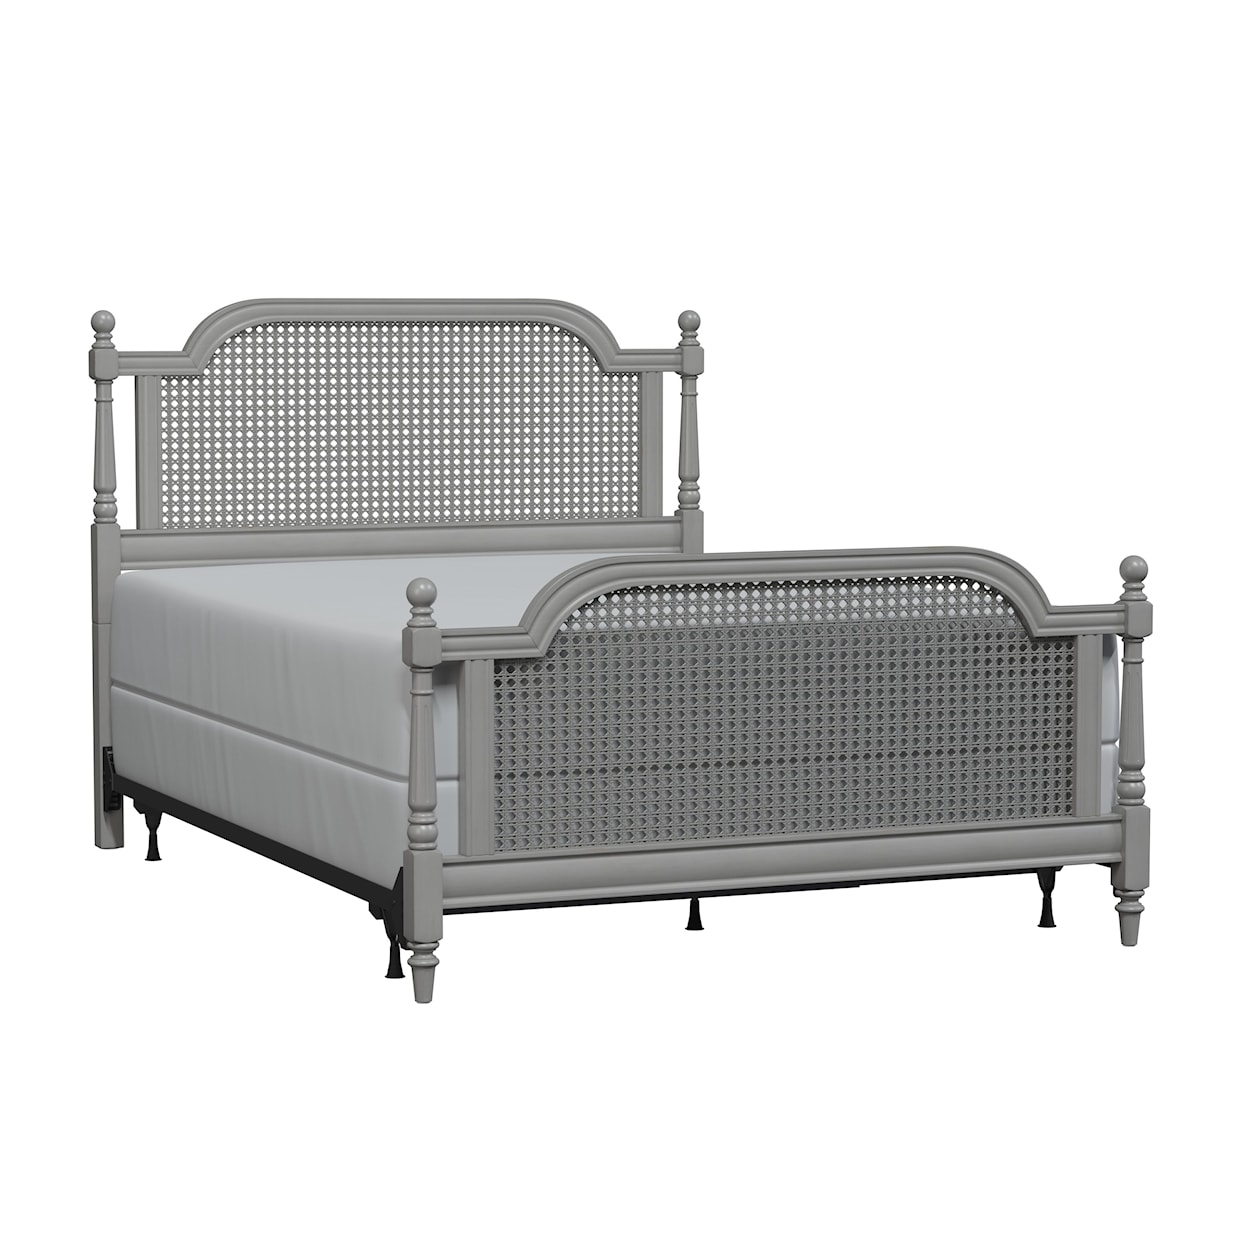 Hillsdale Melanie Wood and Cane Queen Bed with Metal Frame